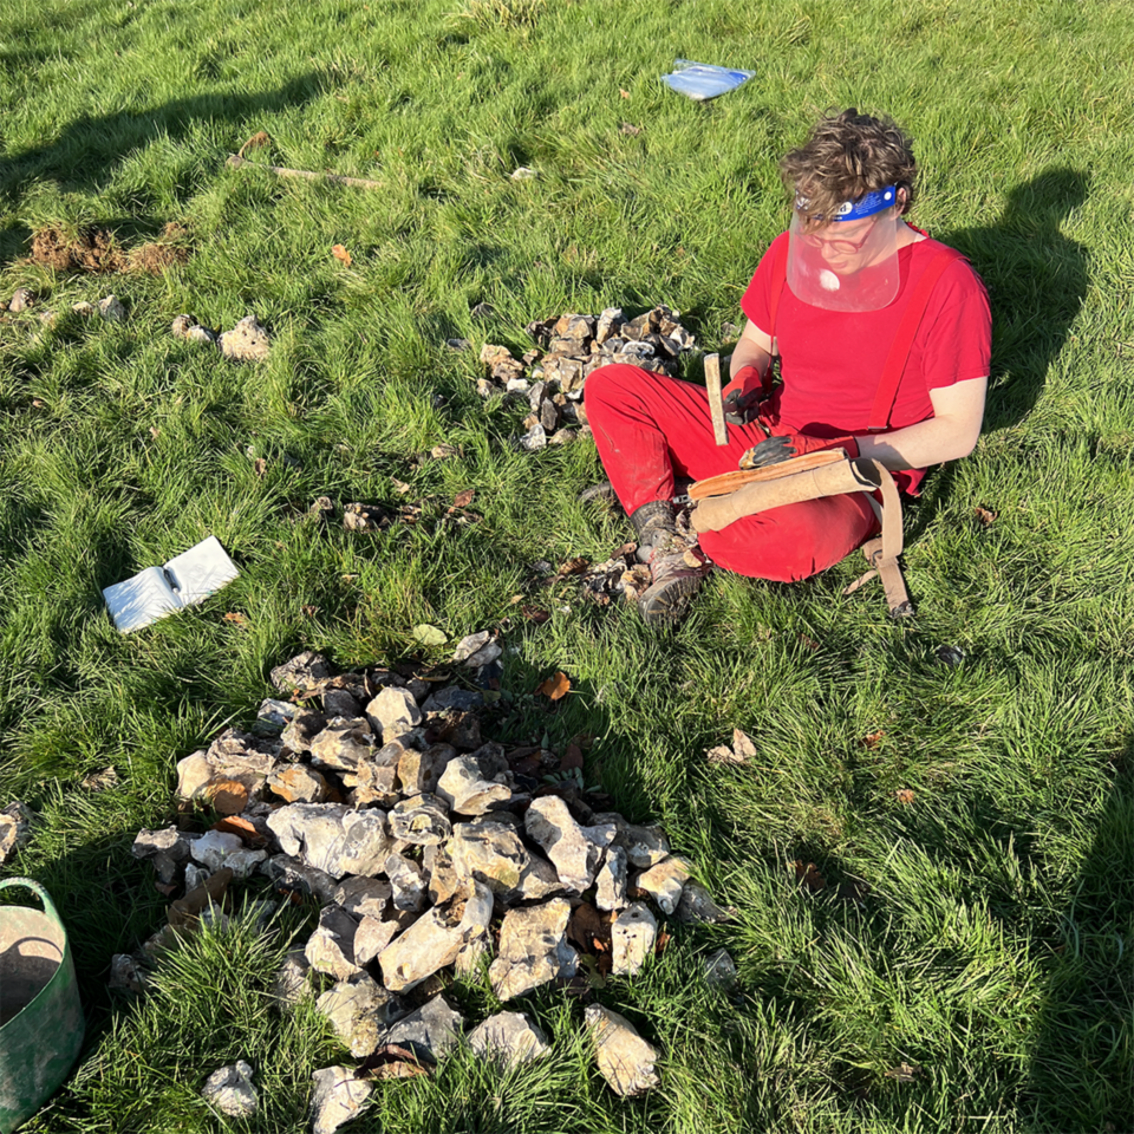 Quentin wearing red sitting on the ground in a field knapping flint 